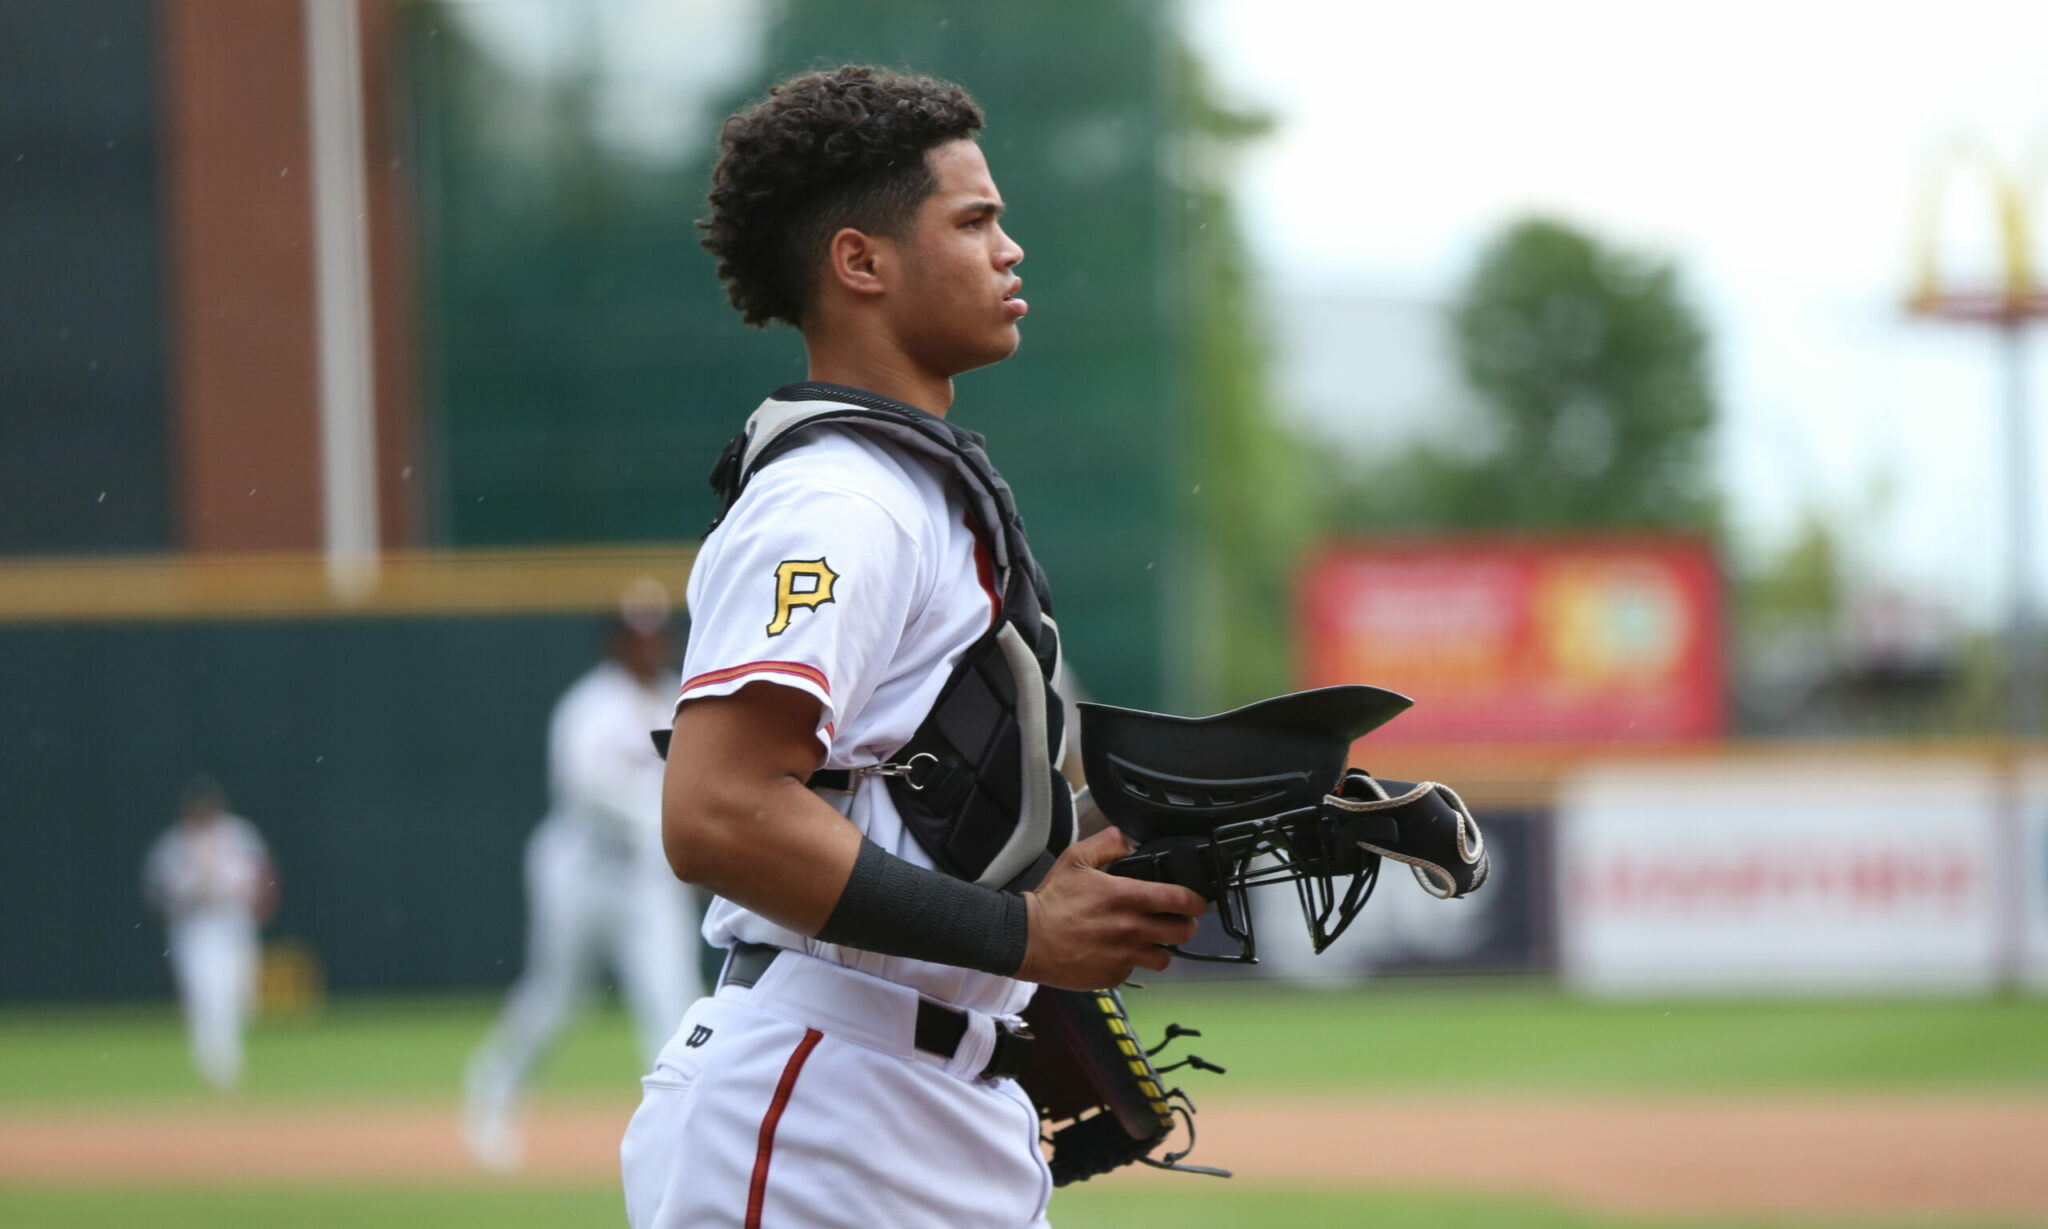 Prospect Roundtable: Which Pirates Prospects Would You Protect From the Rule 5 Draft?